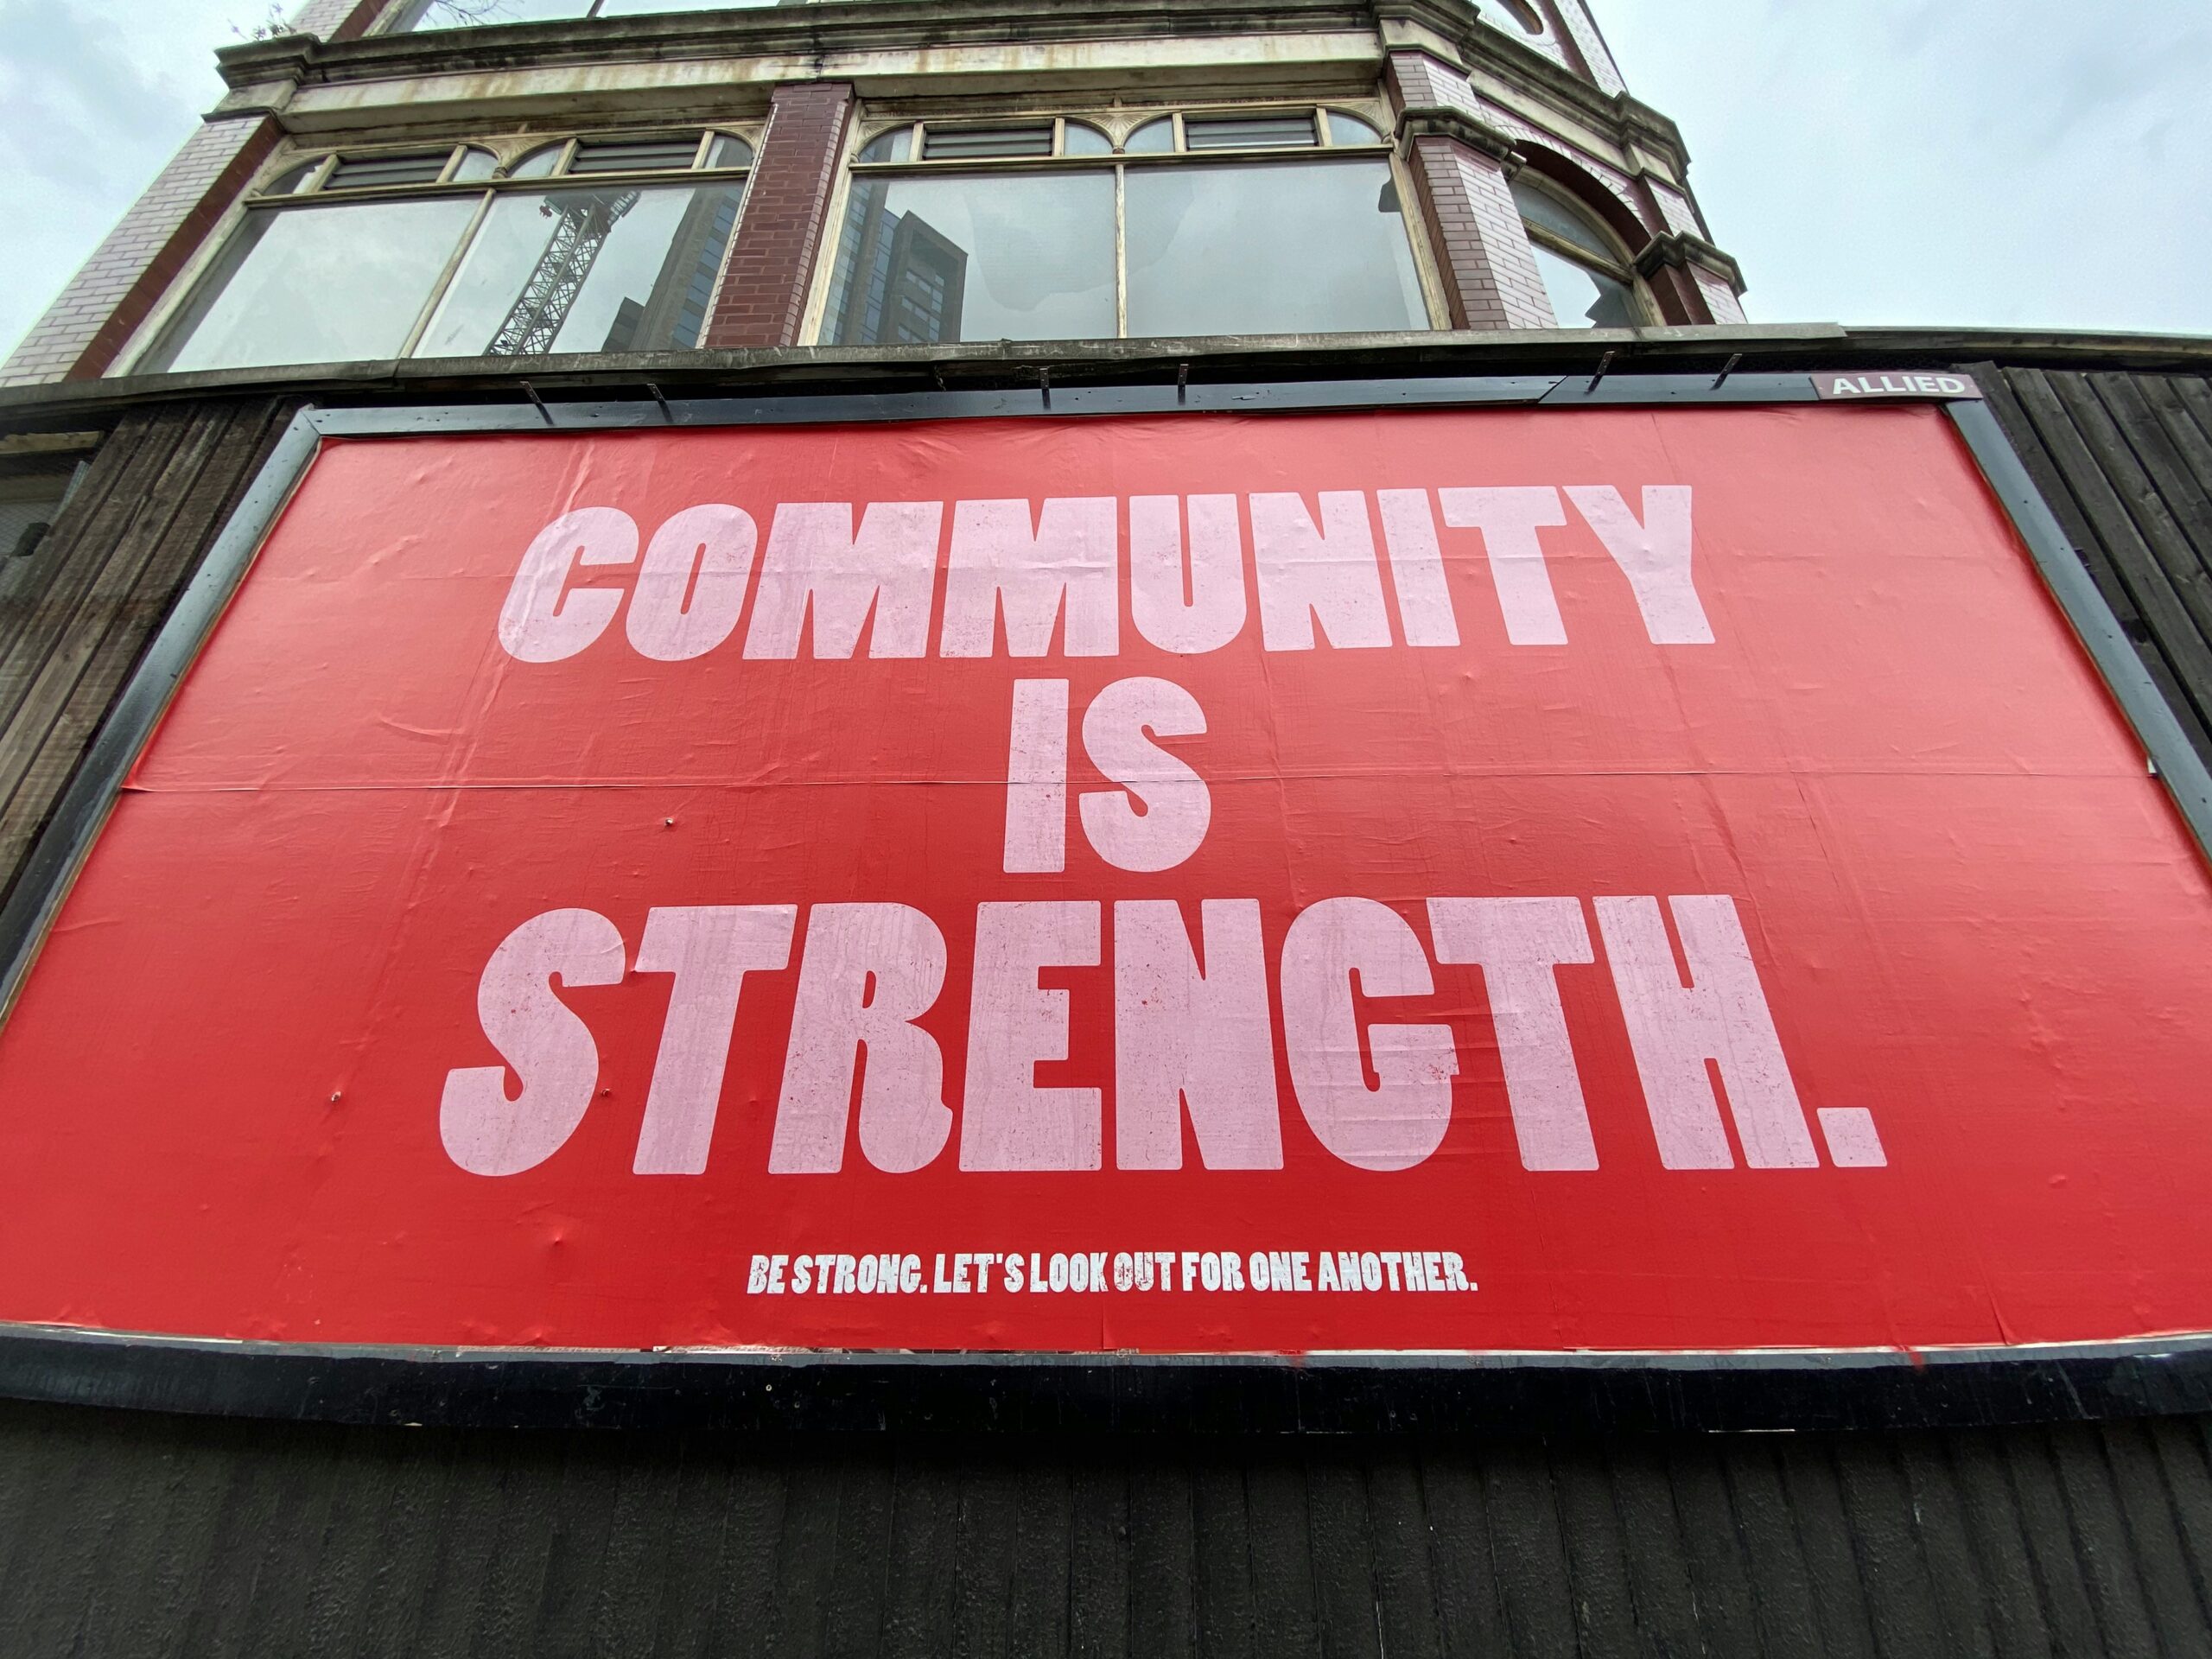 Large red sign saying Community is Strength